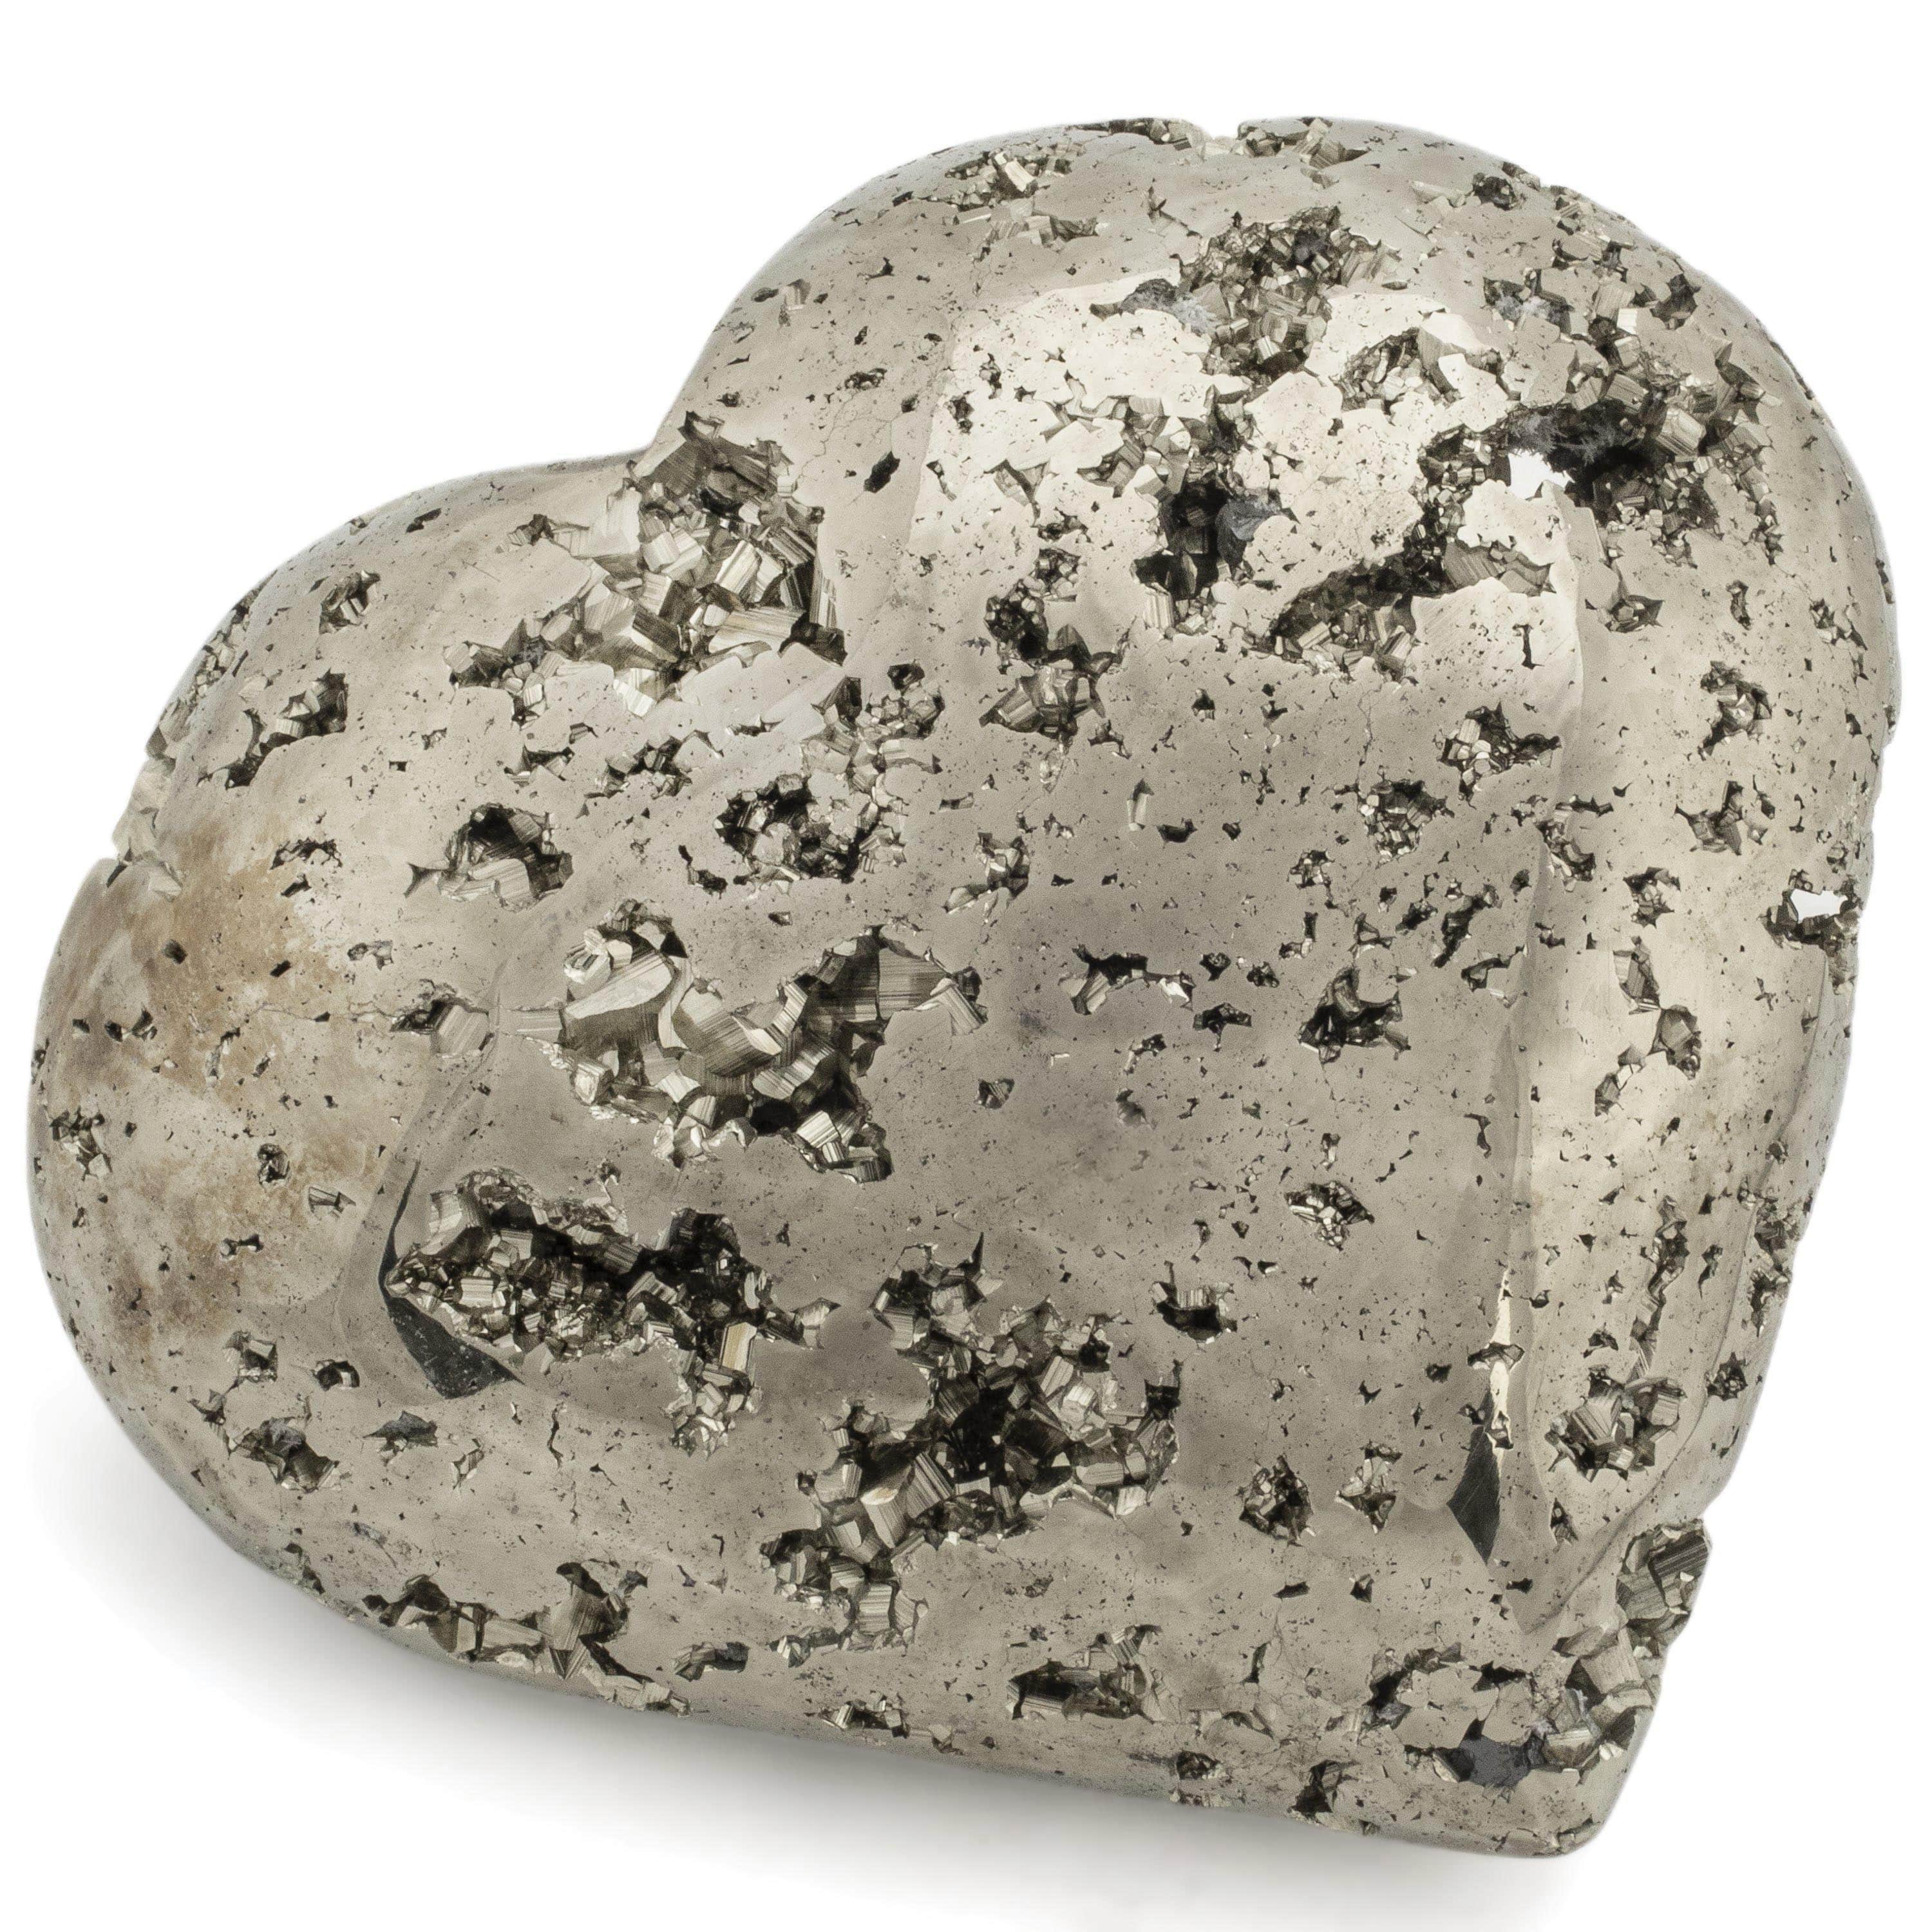 Kalifano Pyrite Pyrite Heart Carving 4" / 550g GH600-PC